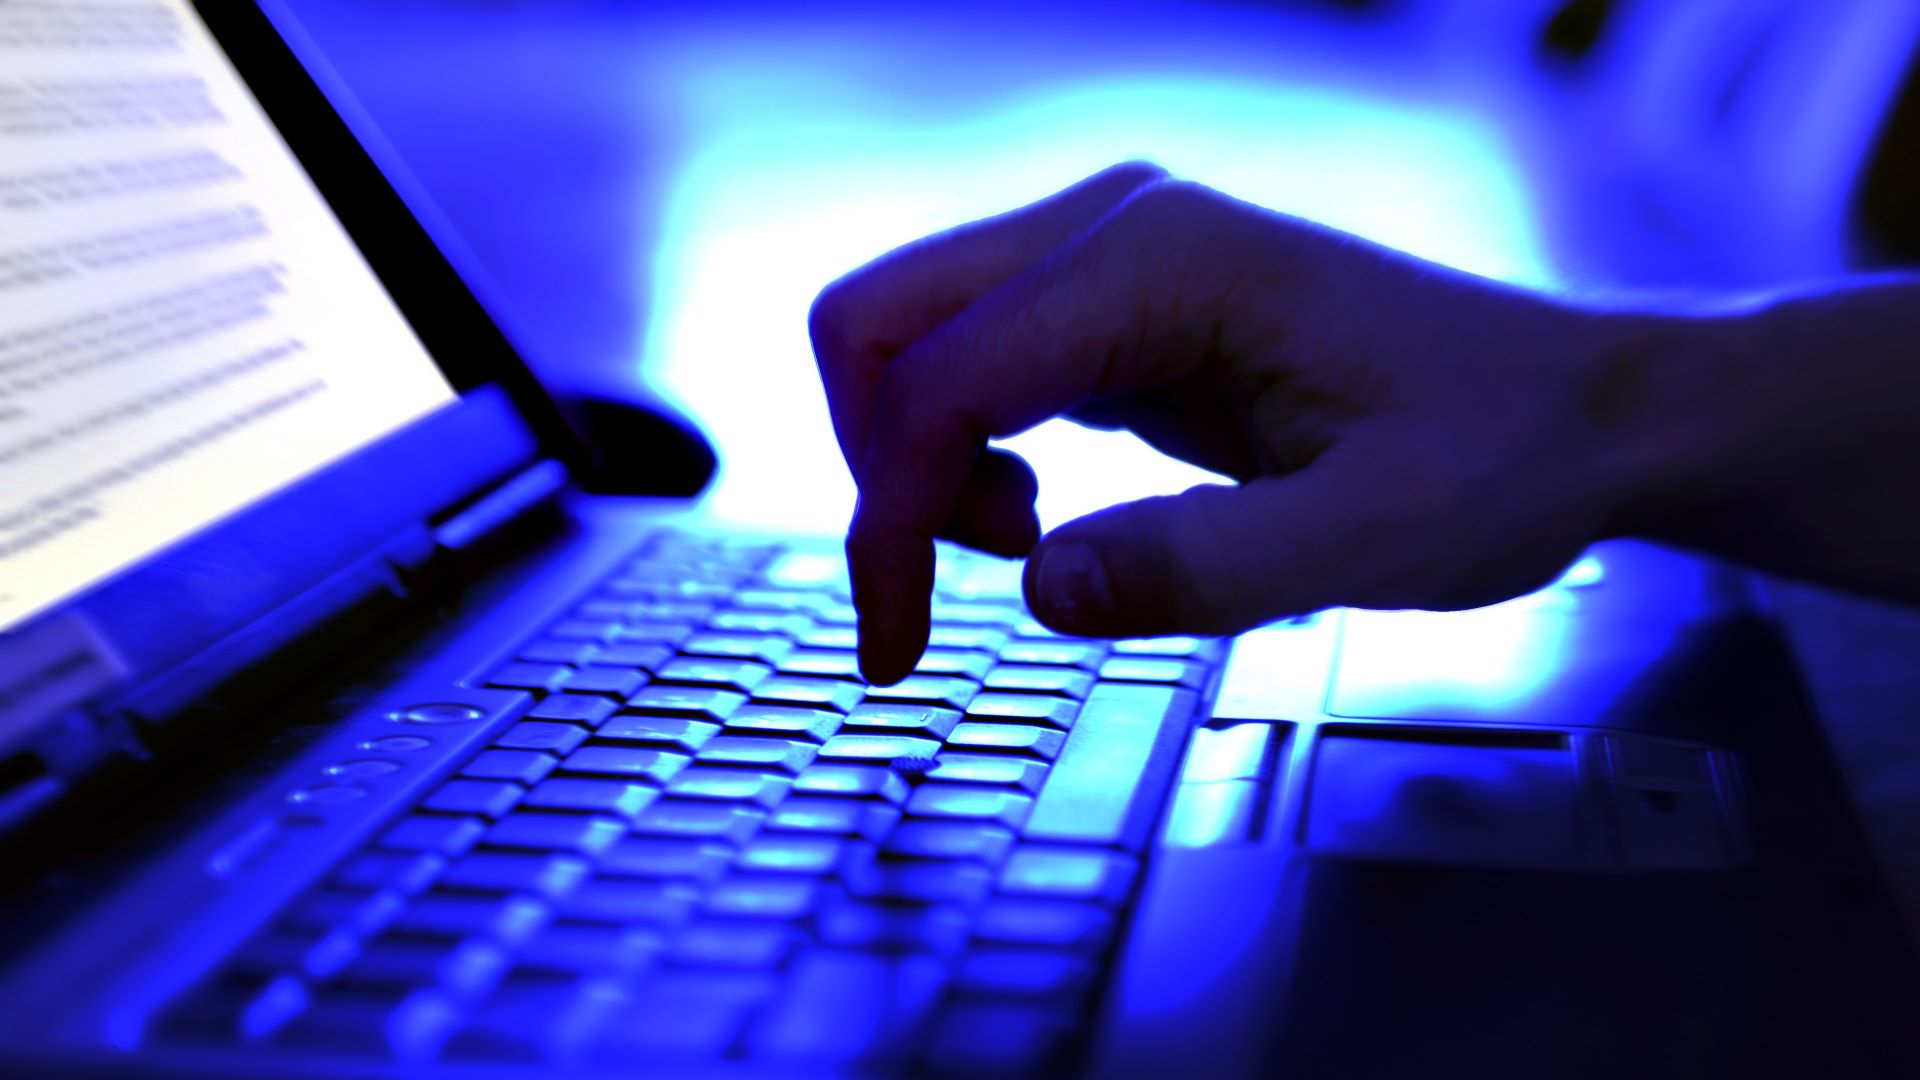 A person typing on a laptop, bathed in blue light